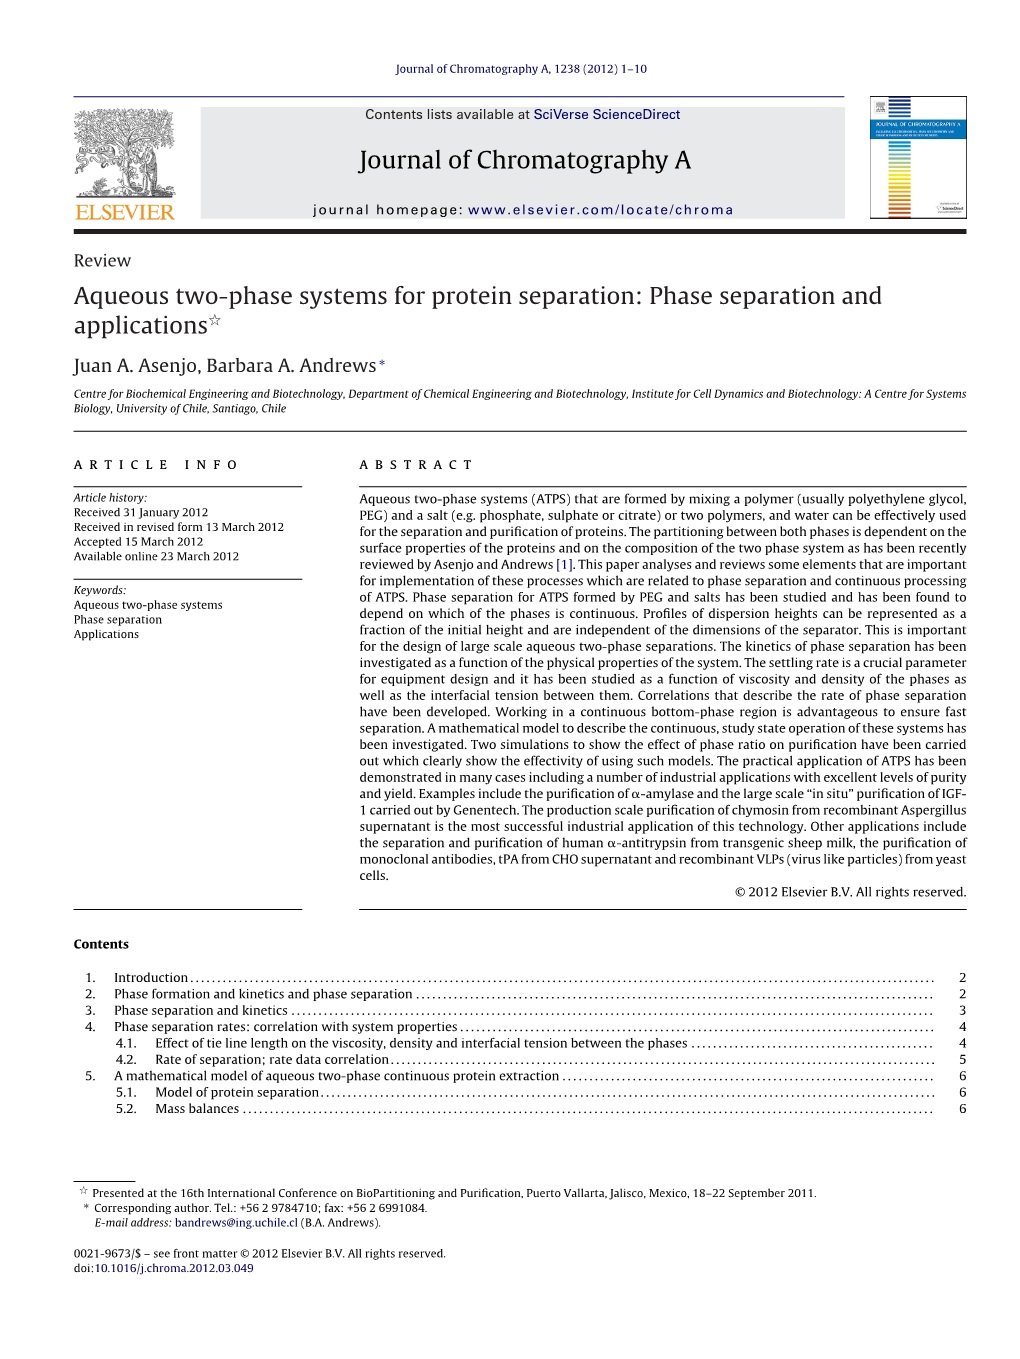 Aqueous Two-Phase Systems for Protein Separation: Phase Separation and Applicationsଝ